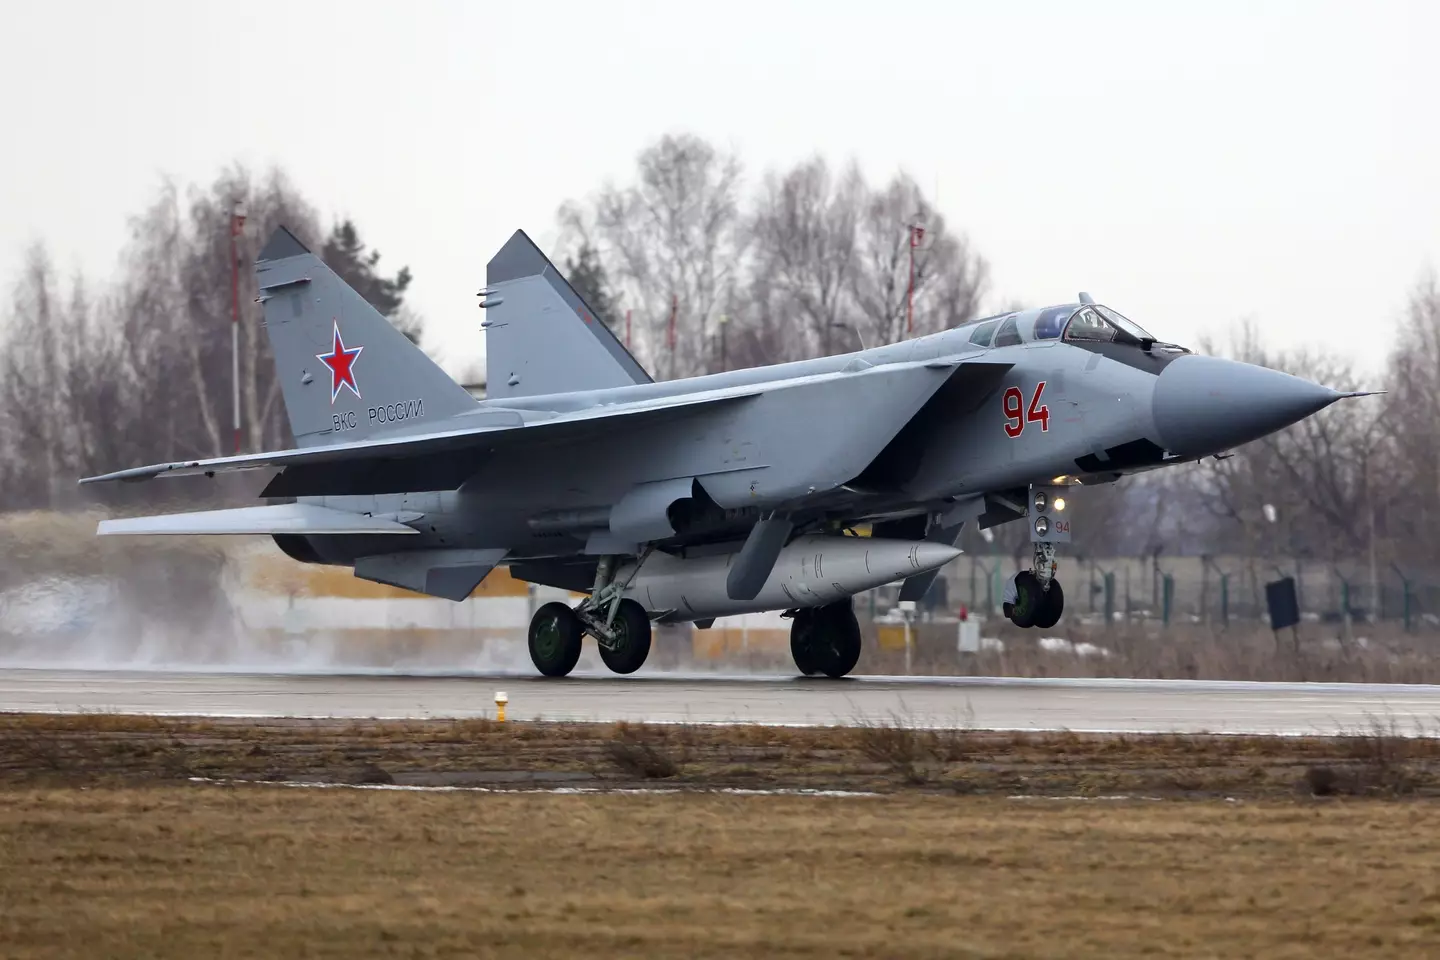 MiG-31K attack aircraft of the Russian Air Force with Kinzhal missile landing.